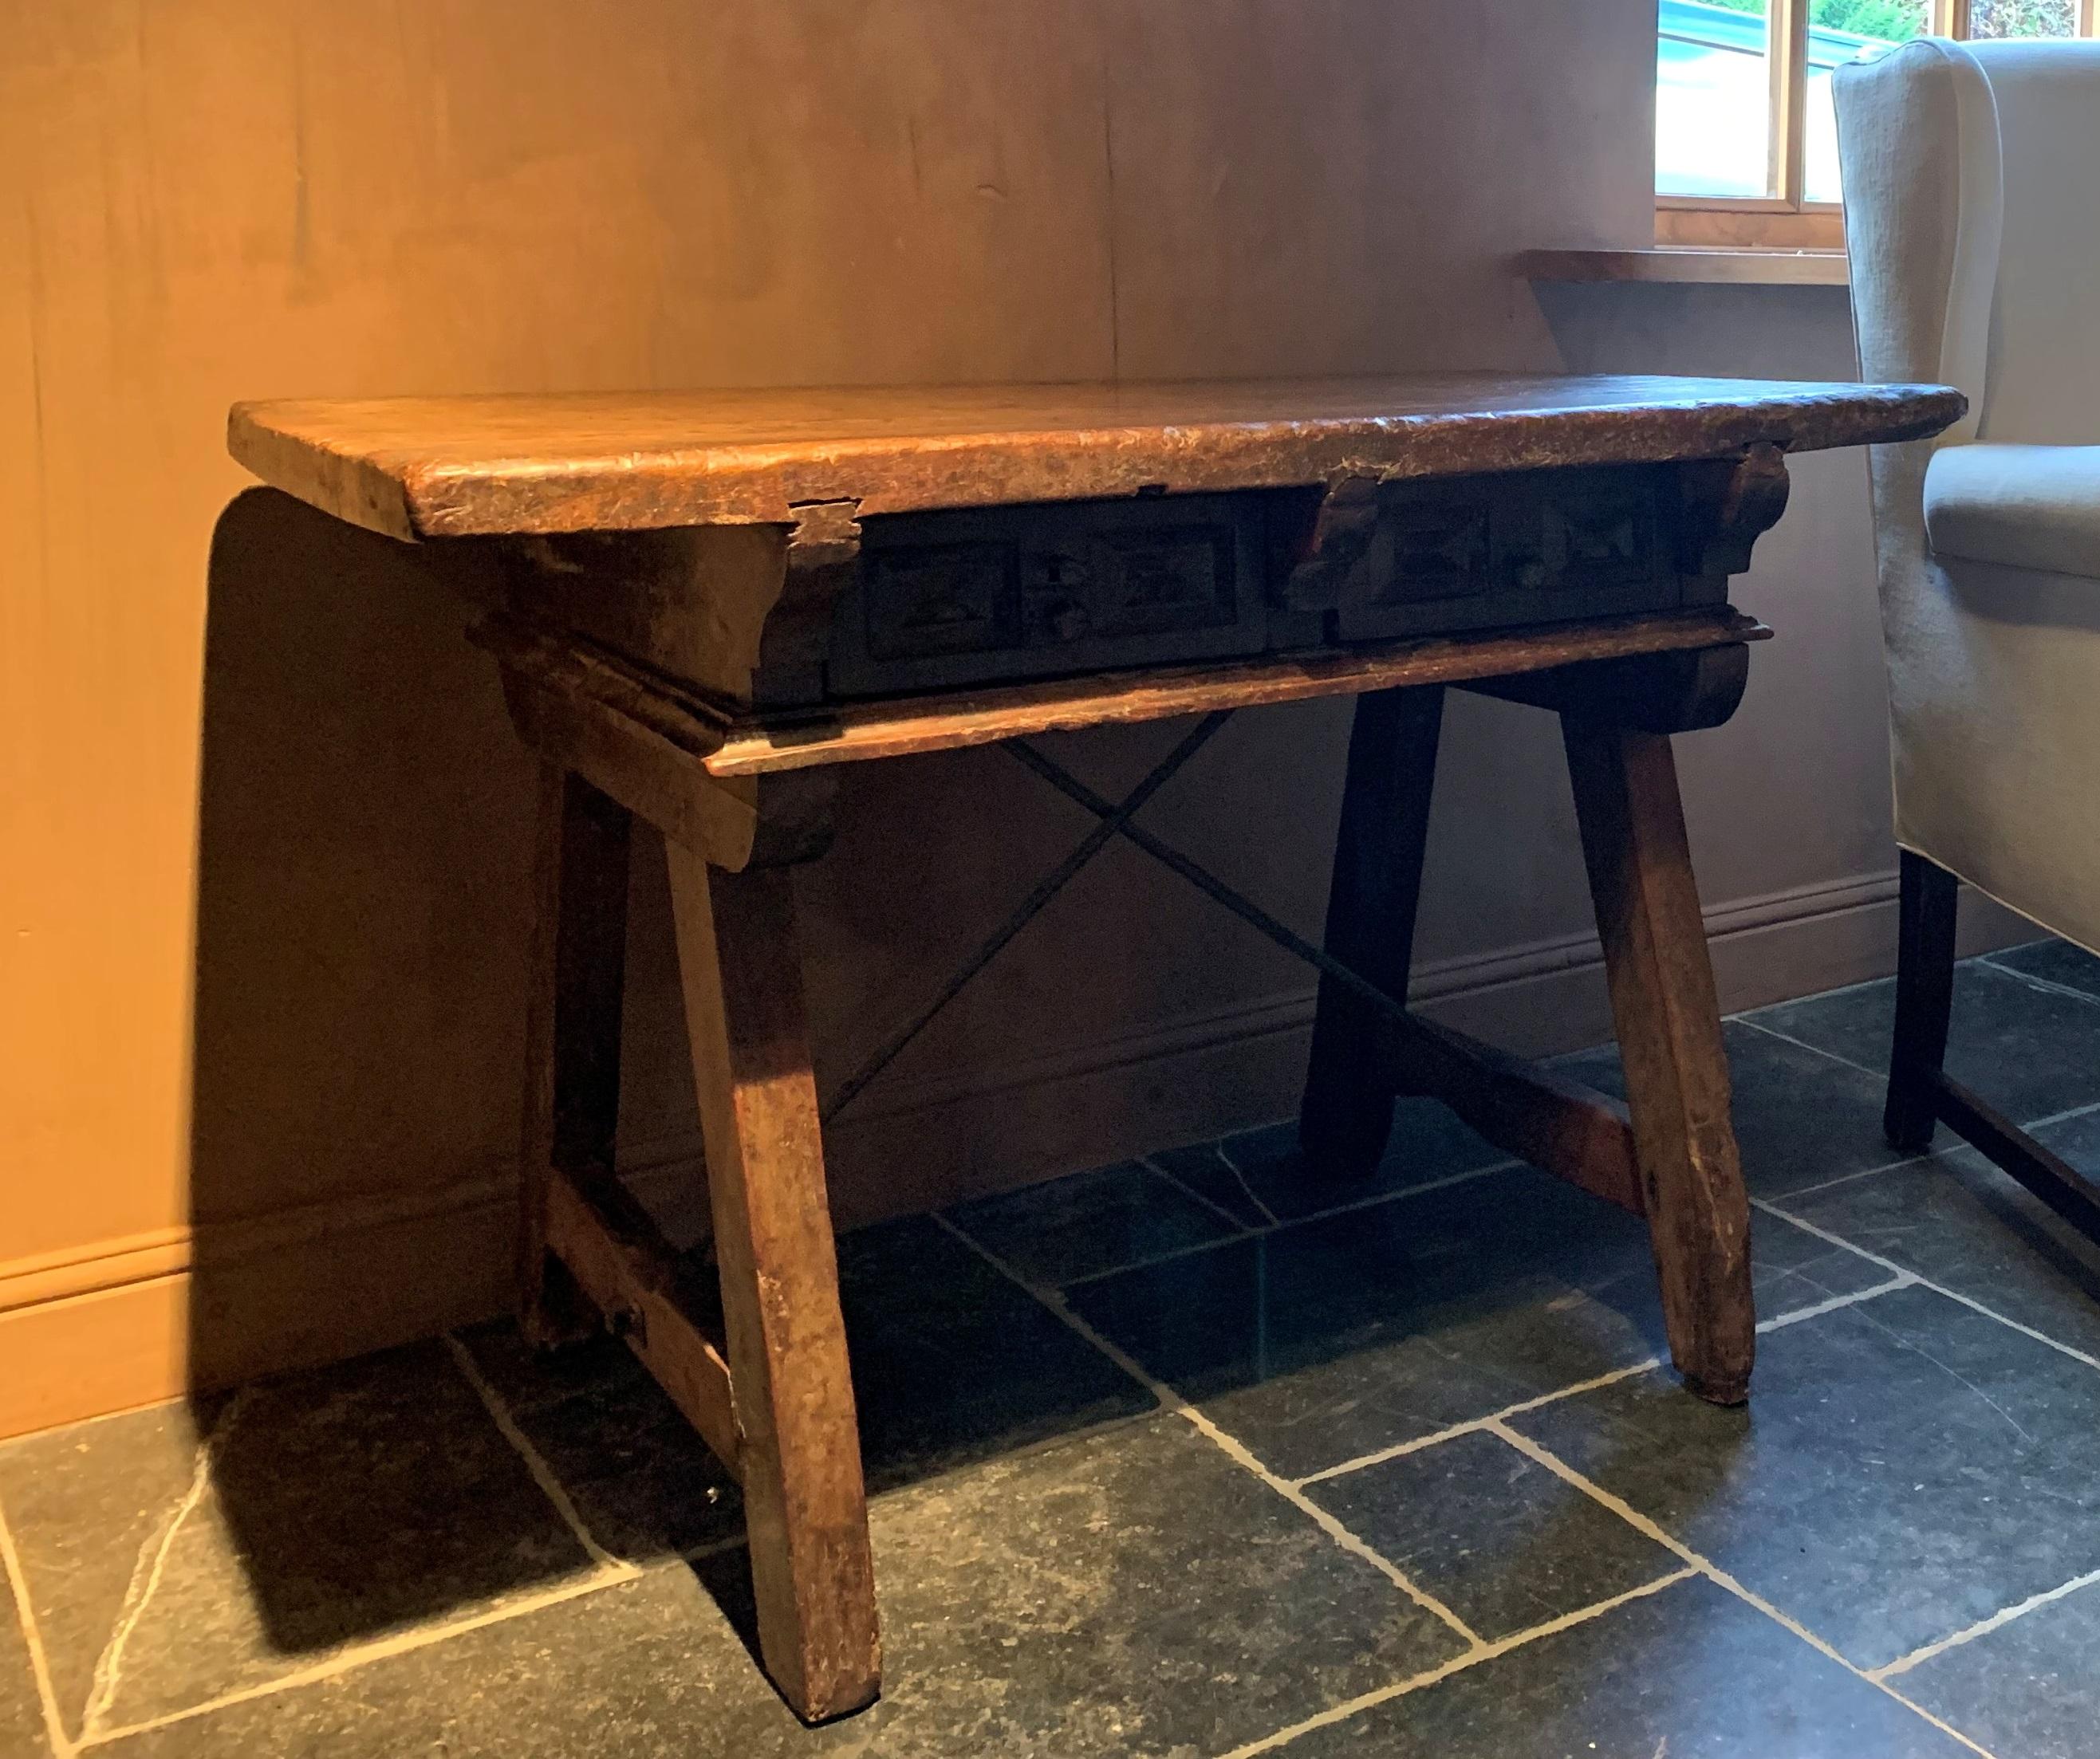 A fine 17th century Spanish walnut trestle table. Sometimes referred to as rent or balliu table these kinds of small sidetables were often used to exchange financial affaires. As they had a prominent function these were well made and finished. This